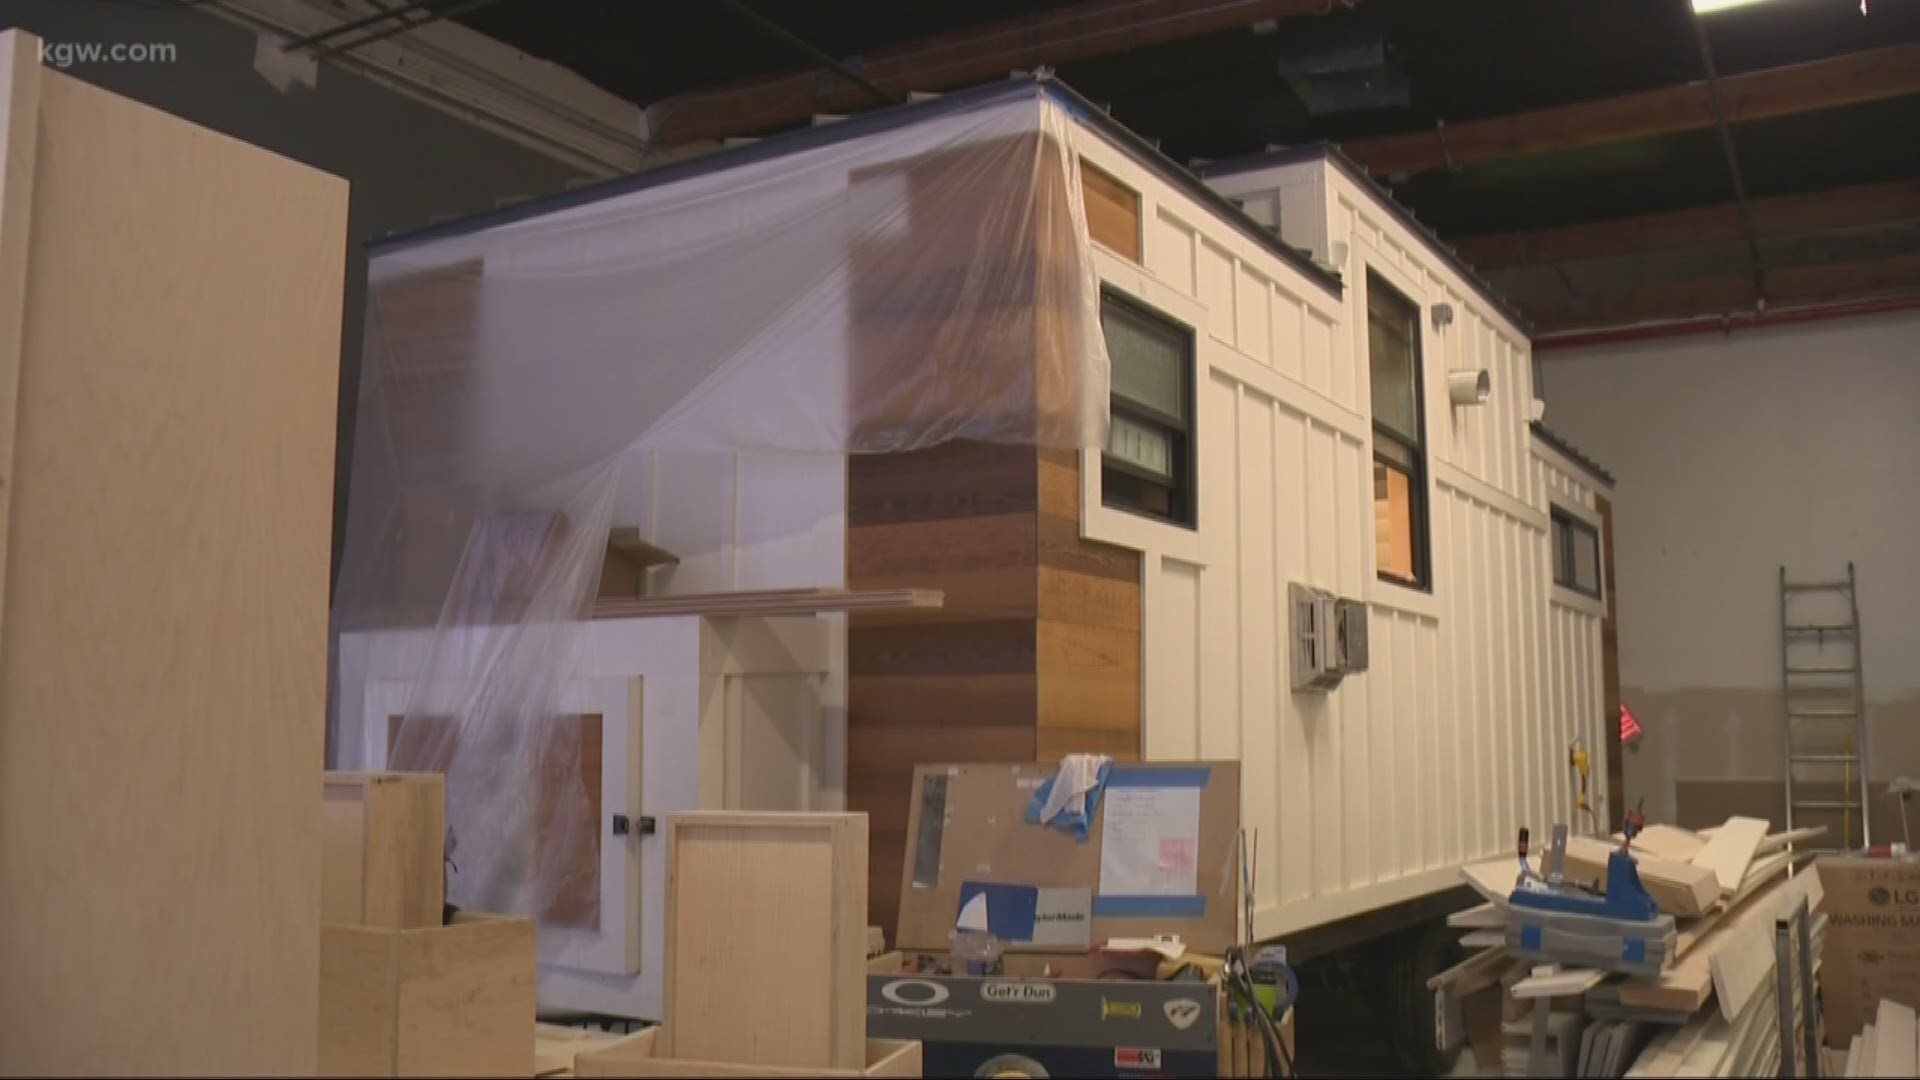 Will tiny homes be part of the Street of Dreams this year?